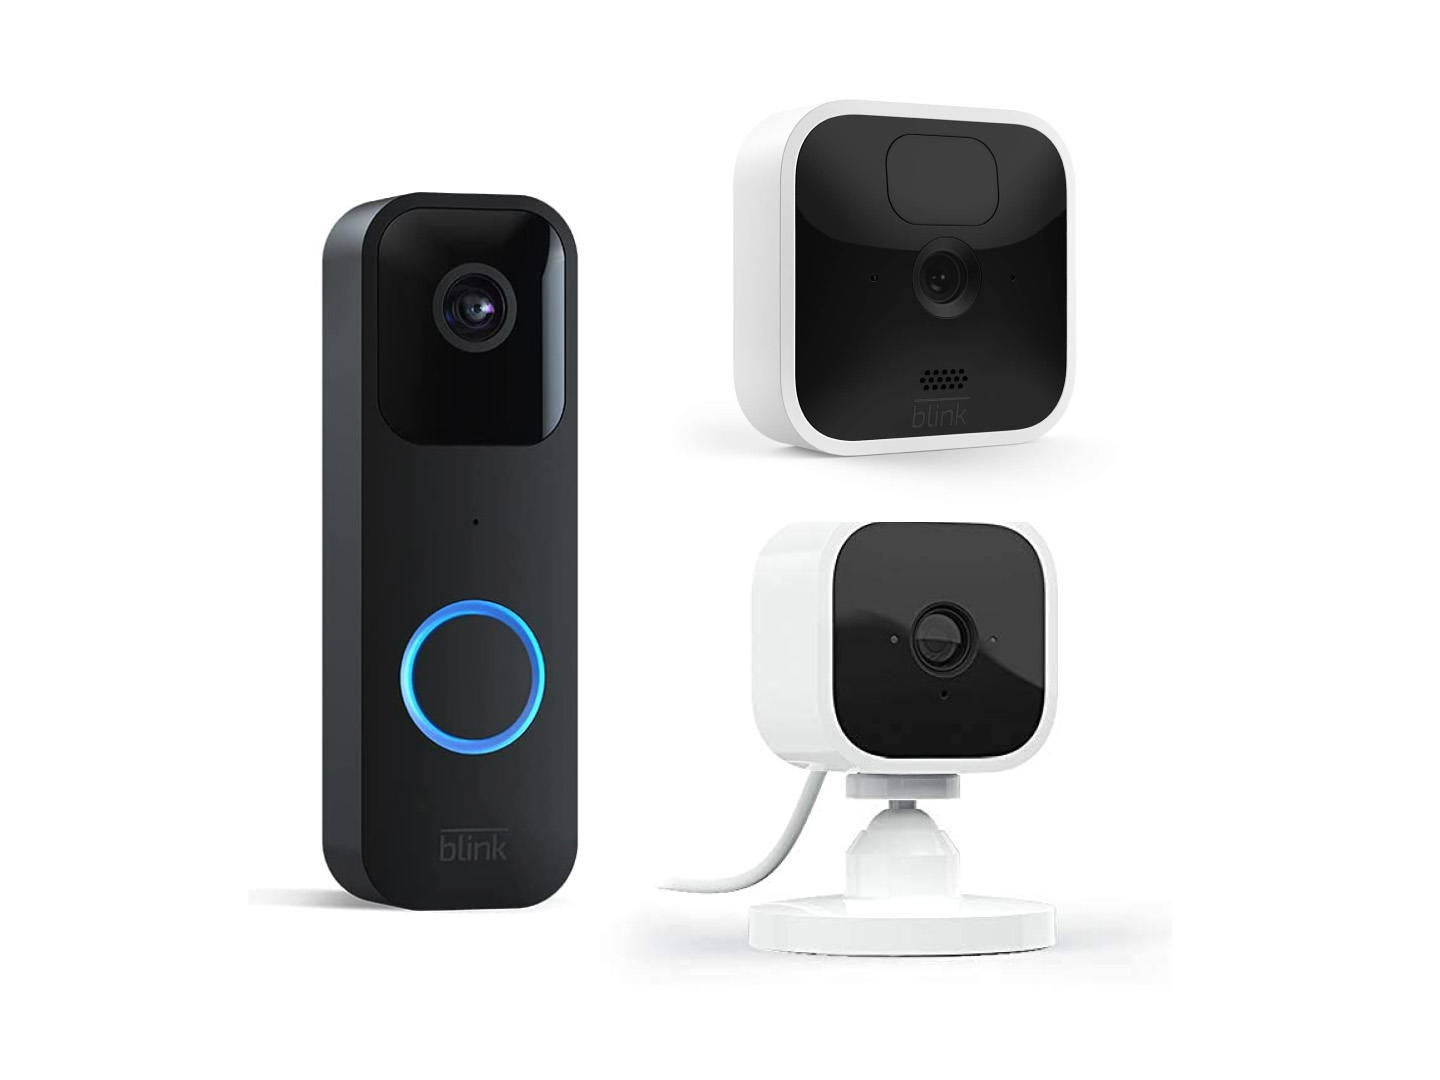 Blink doorbell, wireless camera, and wired camera